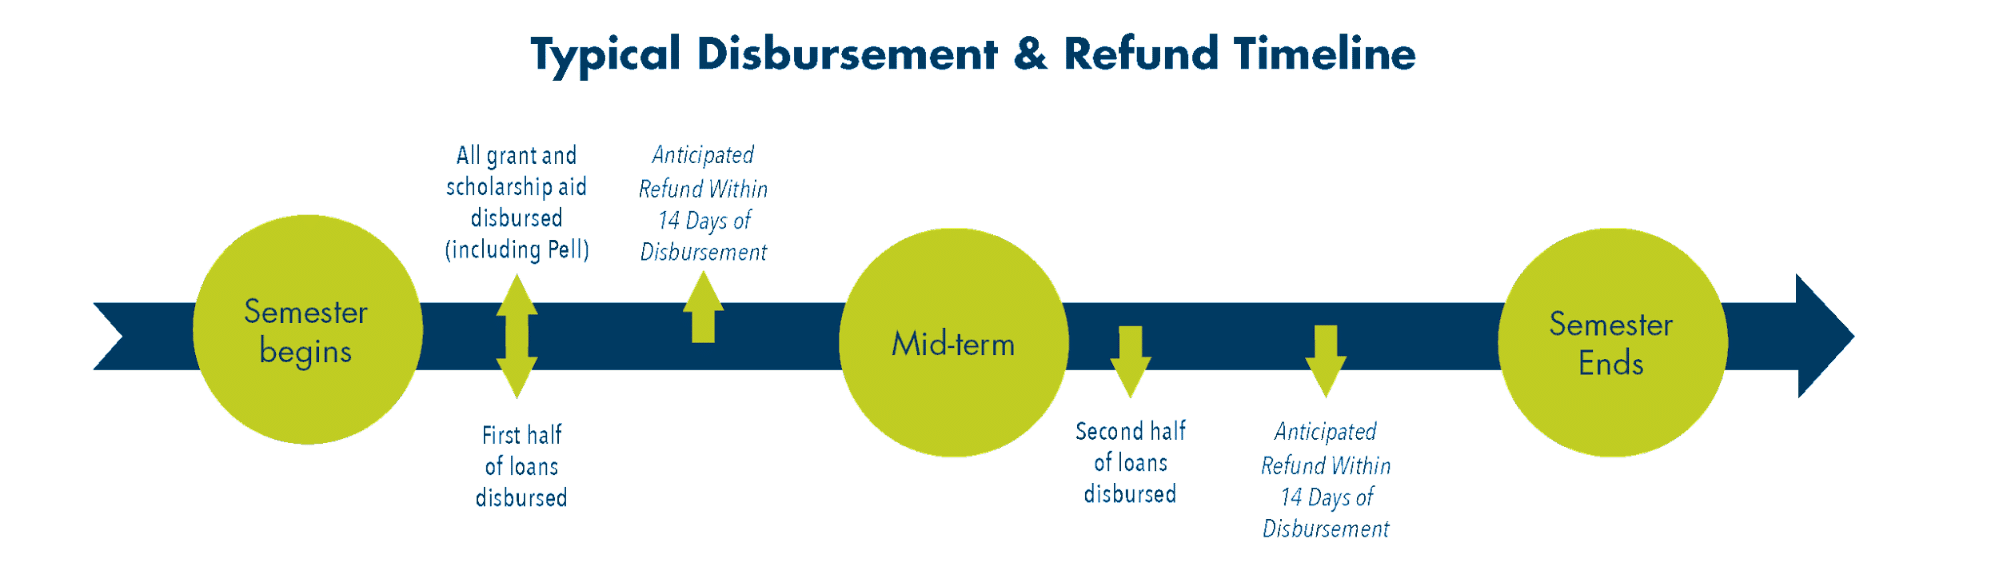 typical disbursement and refund timeline